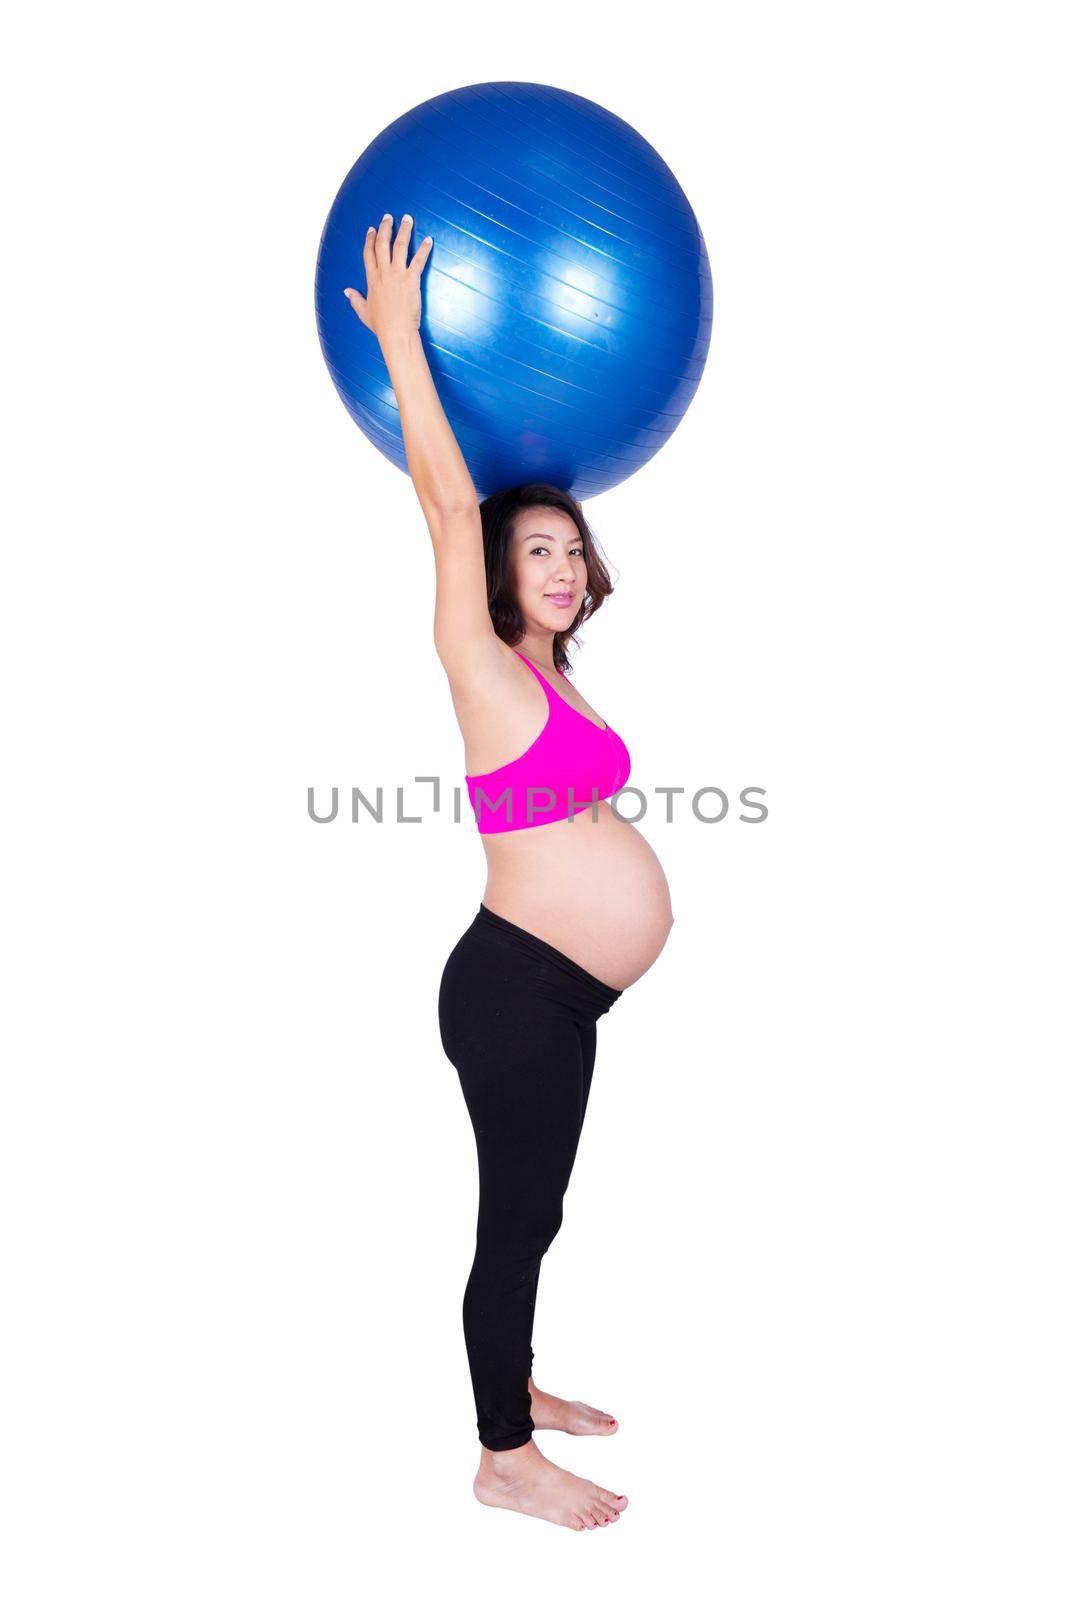 Pregnant woman with fitness ball on white background by geargodz